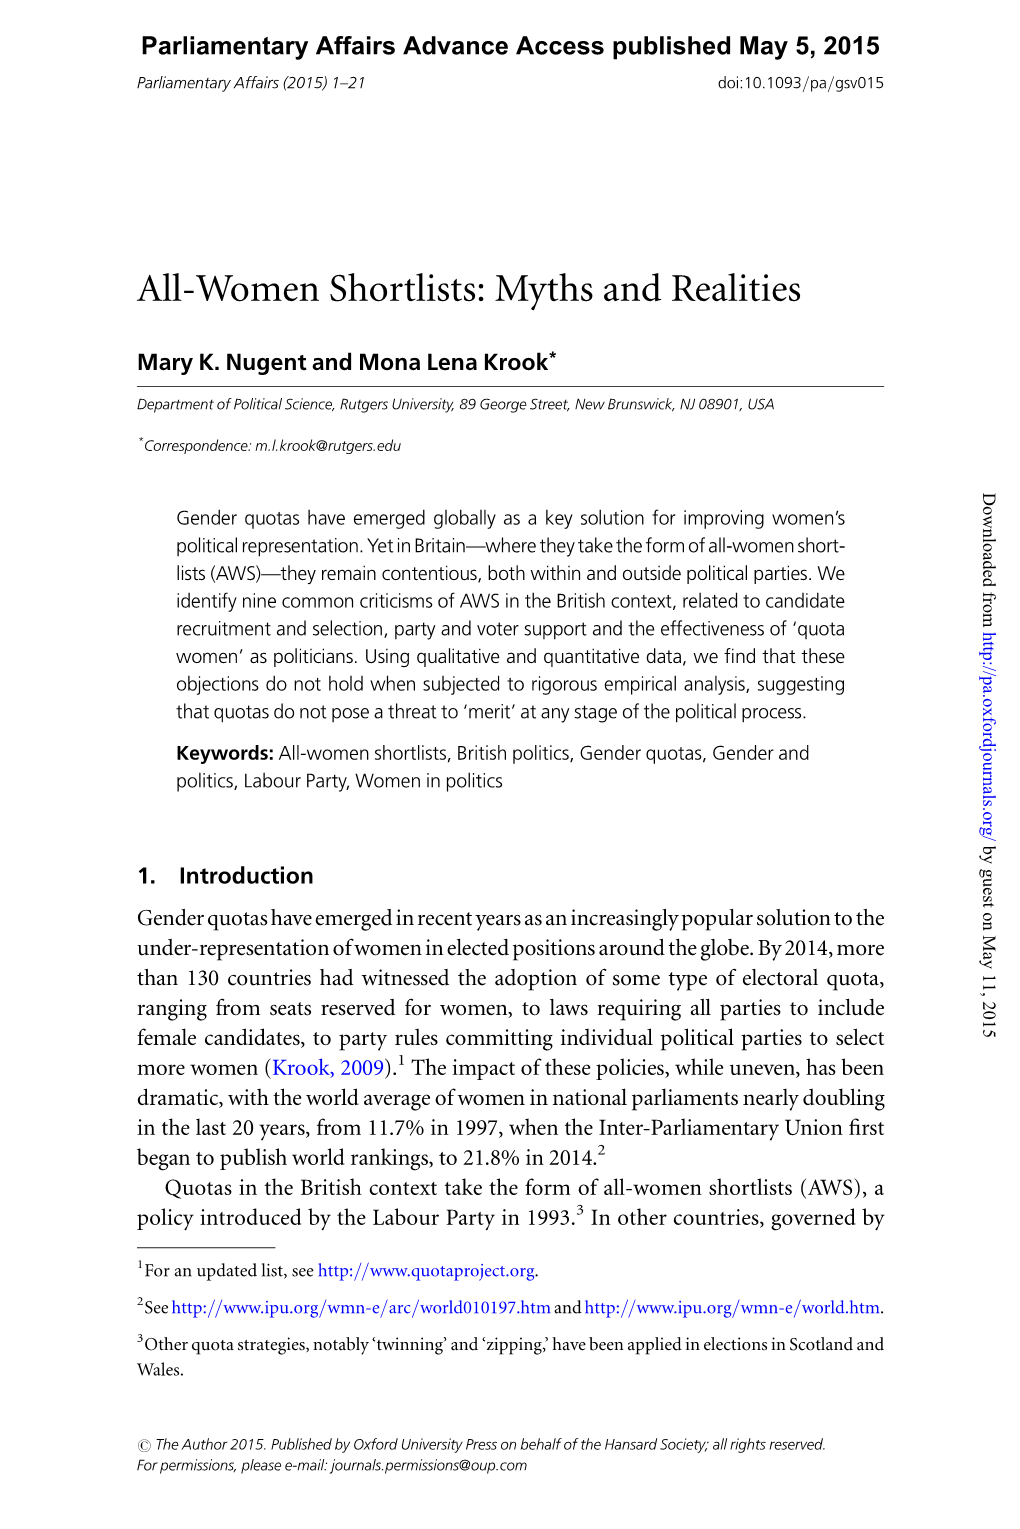 All-Women Shortlists: Myths and Realities